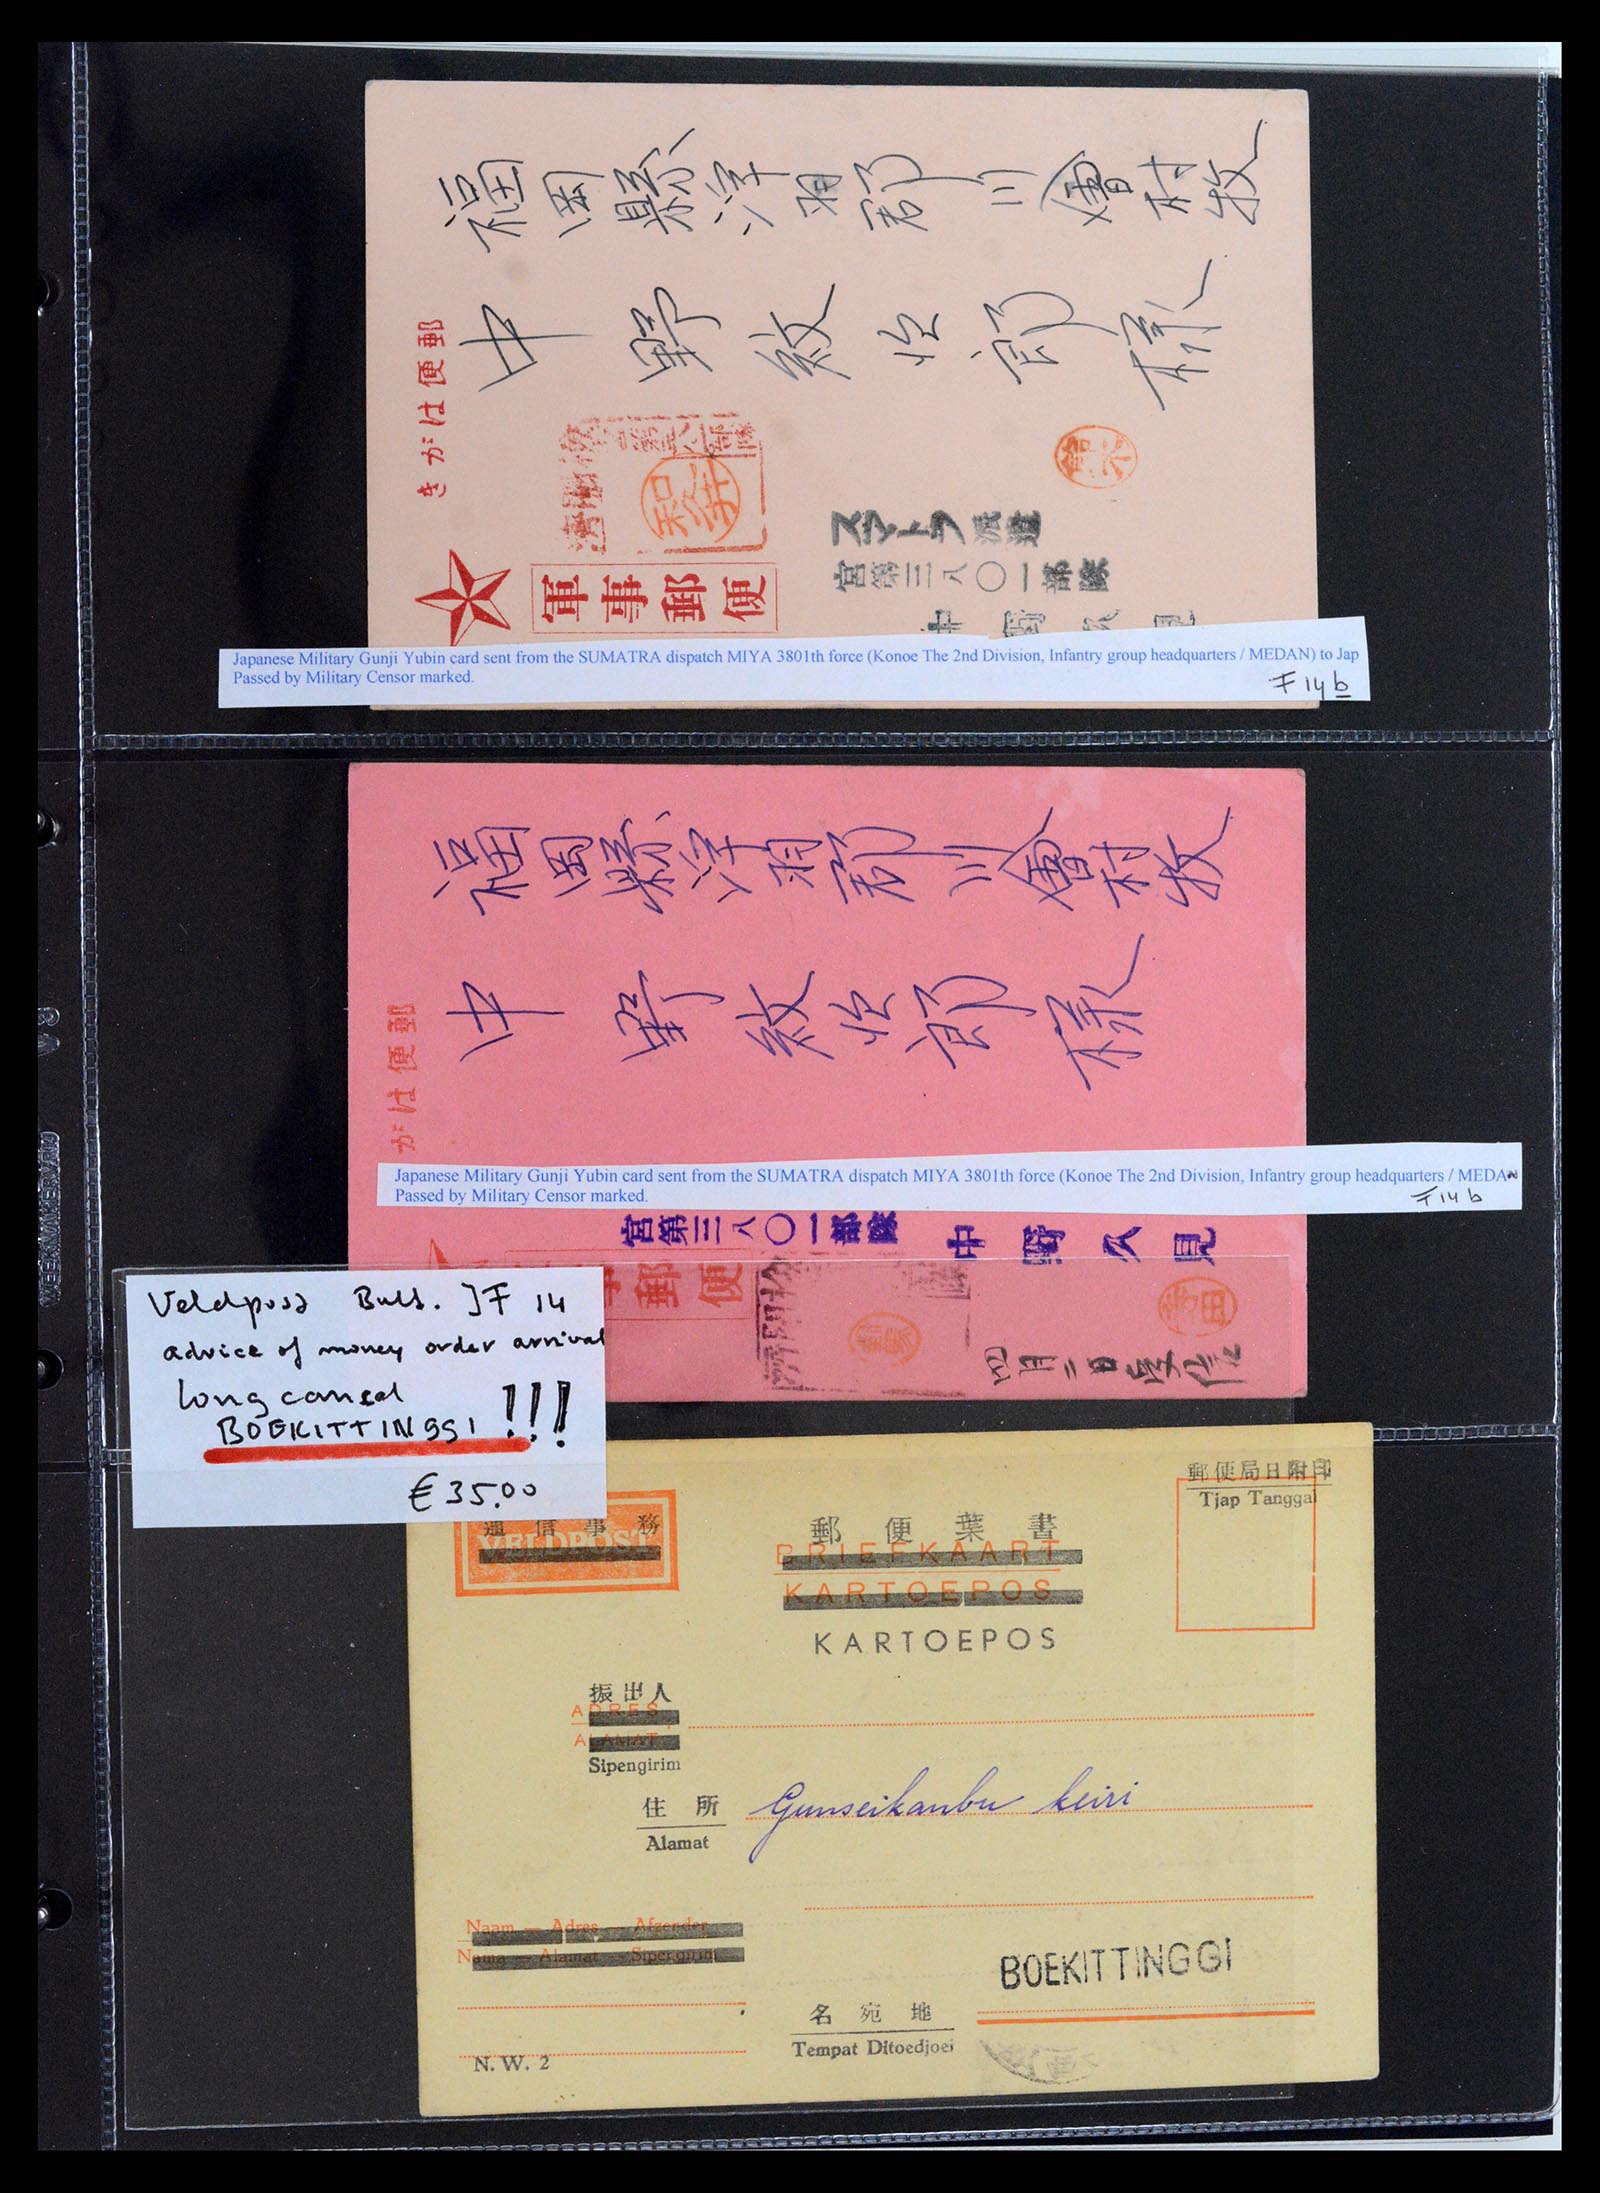 37423 022 - Stamp collection 37423 Dutch Indies Japanese occupation covers 1942-1945